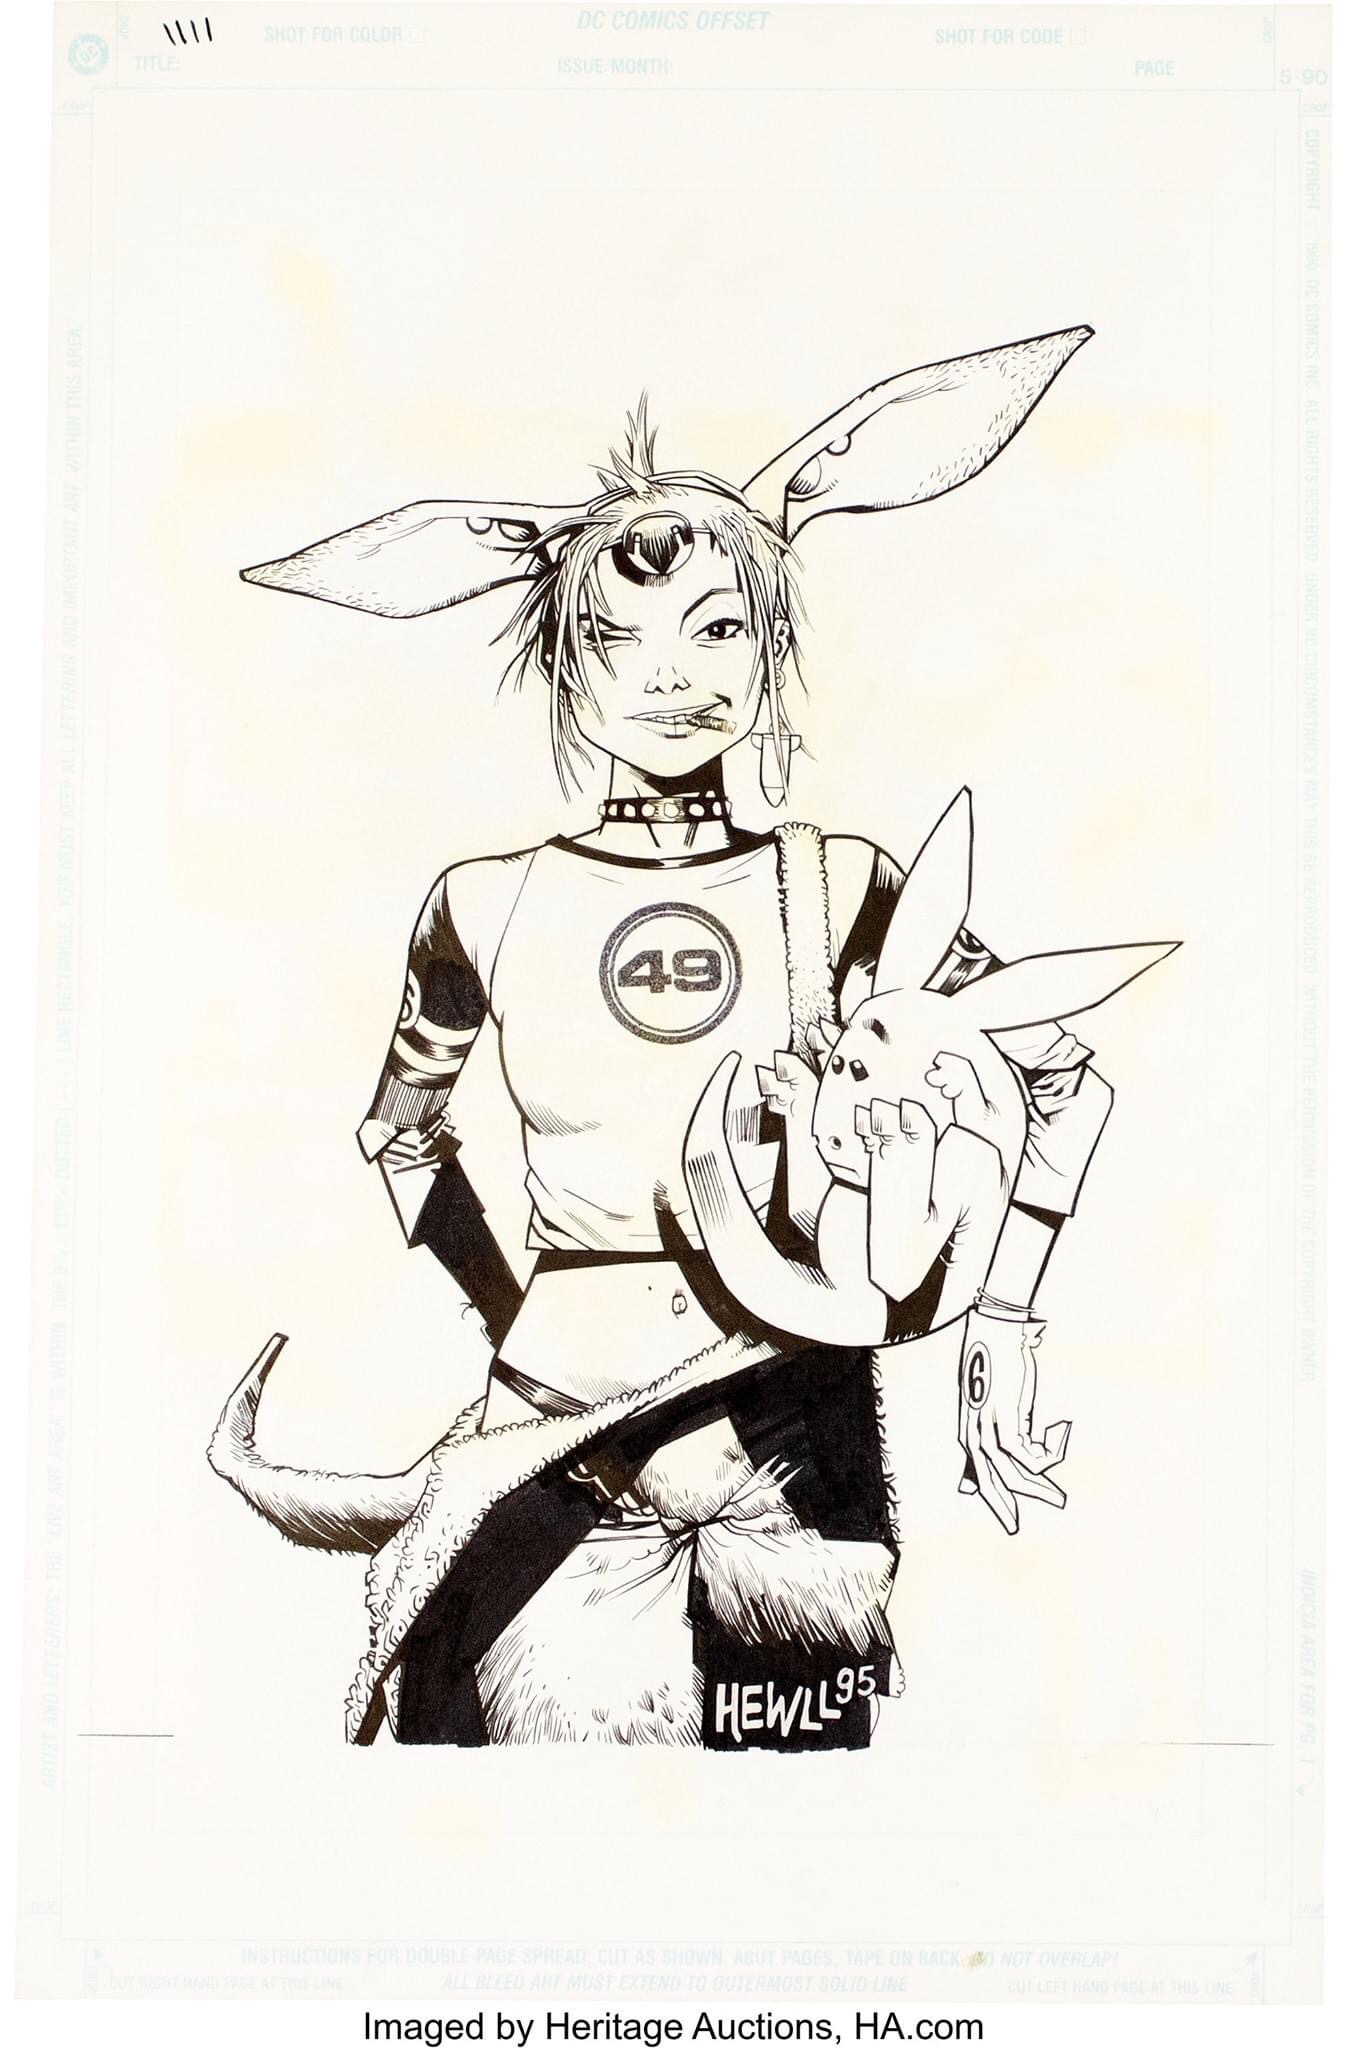 Jamie Hewlett Tank Girl The Odyssey #1 Original Art Cover (Vertigo,1995). Cult and historical cover #1 of our favourite dysfunctional punk anarchist, Tank Girl accompanied by Camp Koala. Genesis of the beginnings of Tank Girl out of the head of Jamie Hewlett future Gorillaz band's graphic designer. This image is used several times, in 1995 by Manga Publishing LTD, in 2009 for the cover of the reprint The Odyssey by Titans Comics and directly after that in 2010 for for same adventure by Ankama Editions, a story until then unpublished in France. Ink on DC board with an image area of 9" x 13". Signed, dated. Some white out corrections, slight yellowing. In Very Good Condition